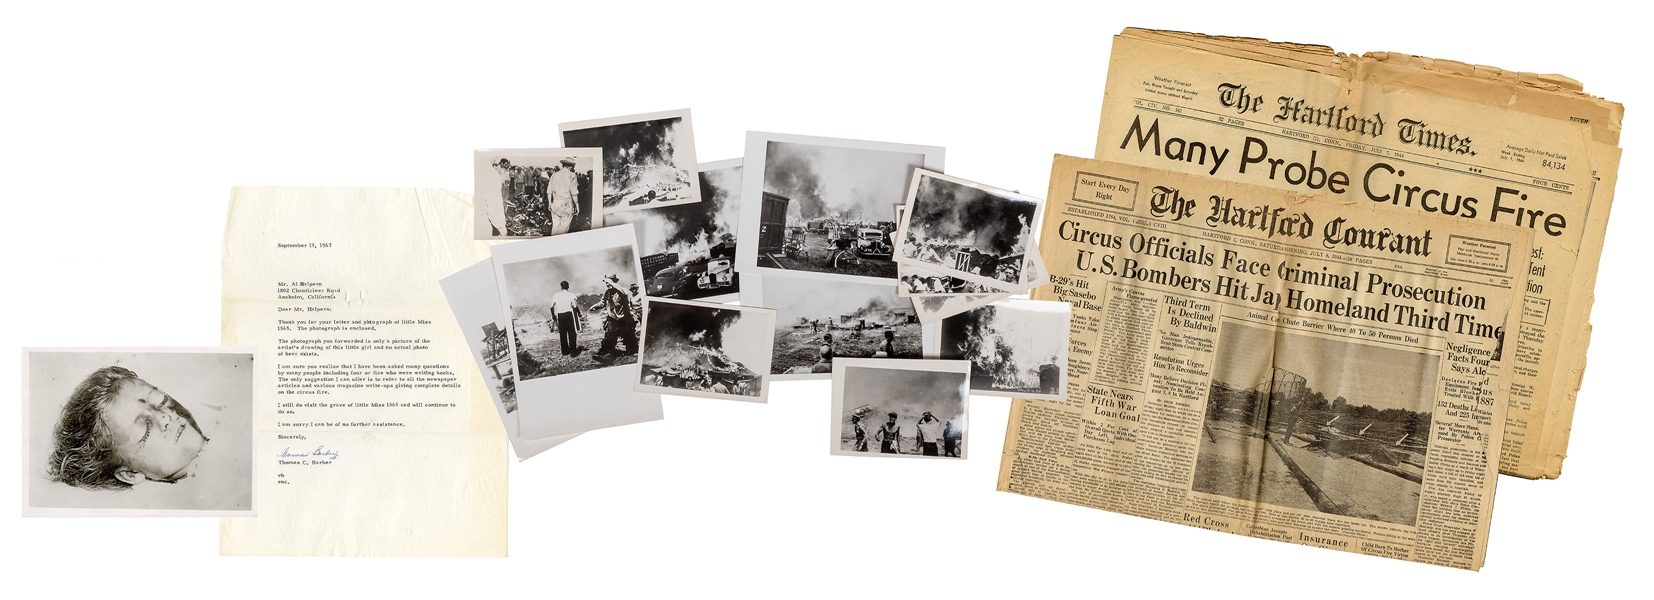  Hartford Circus Fire Photos and Newspapers Archive. Researc...